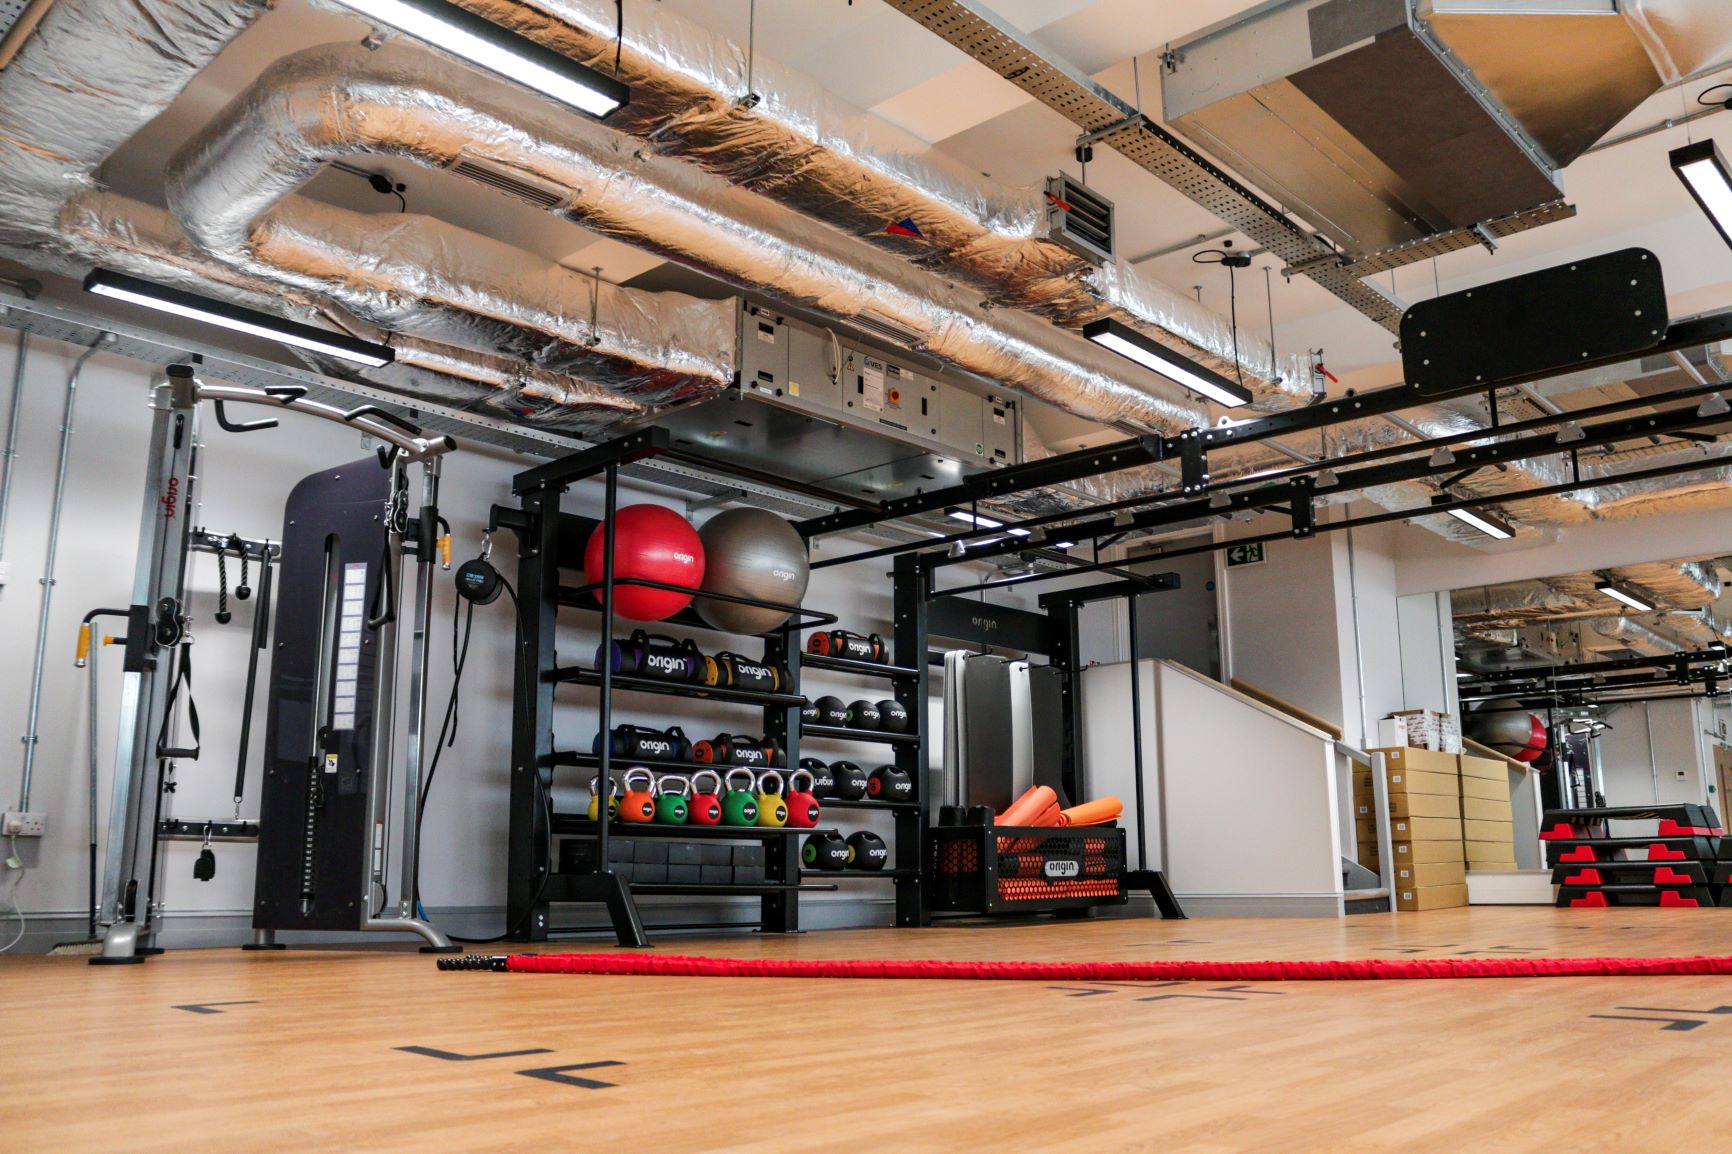 Clifotn personal fitness centre